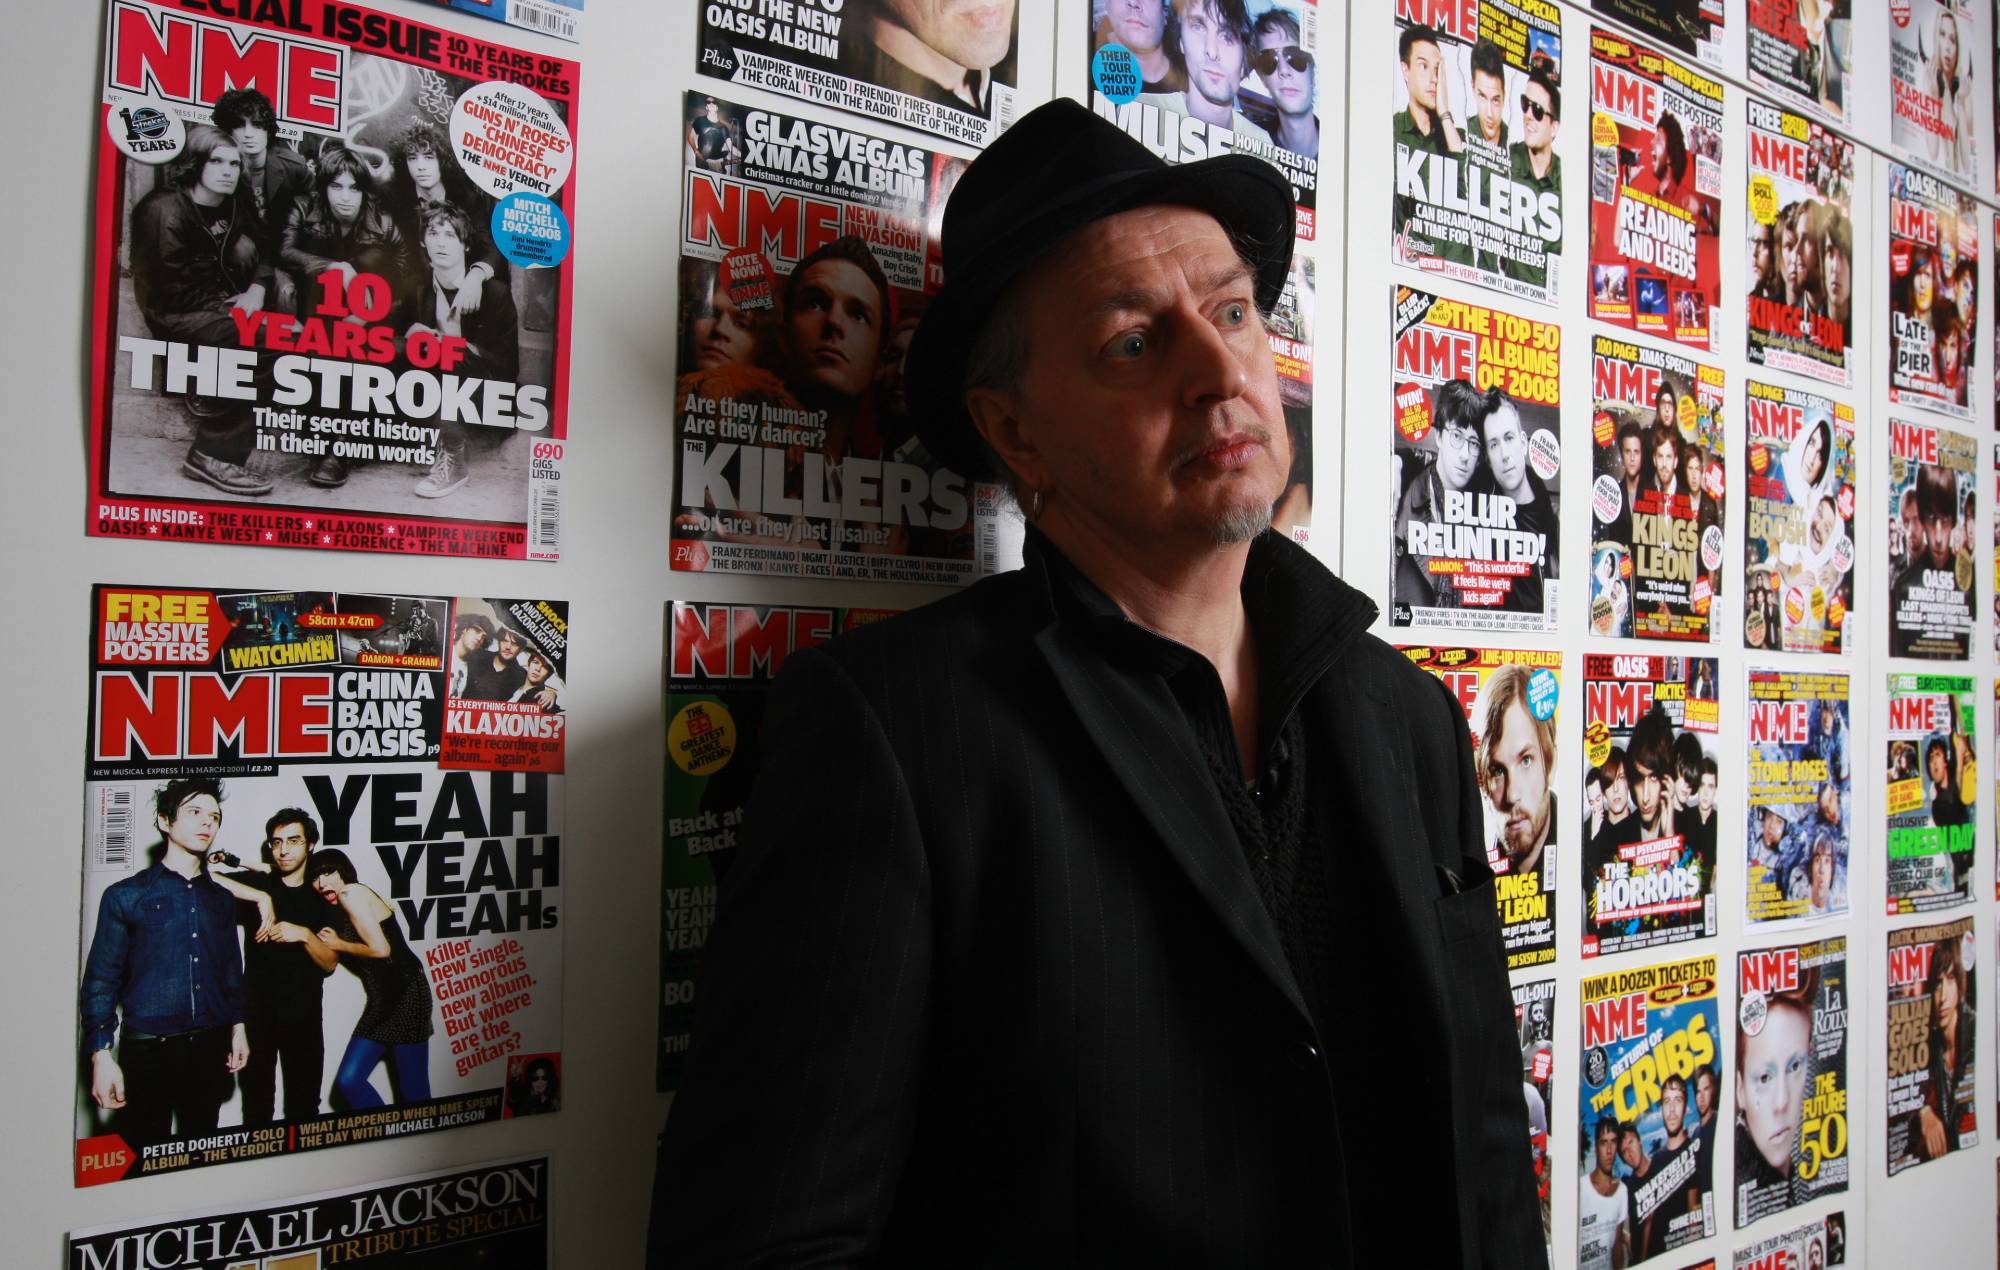 Legendary NME scribe Nick Kent shares his tallest tales: “Going to extremes gets results”